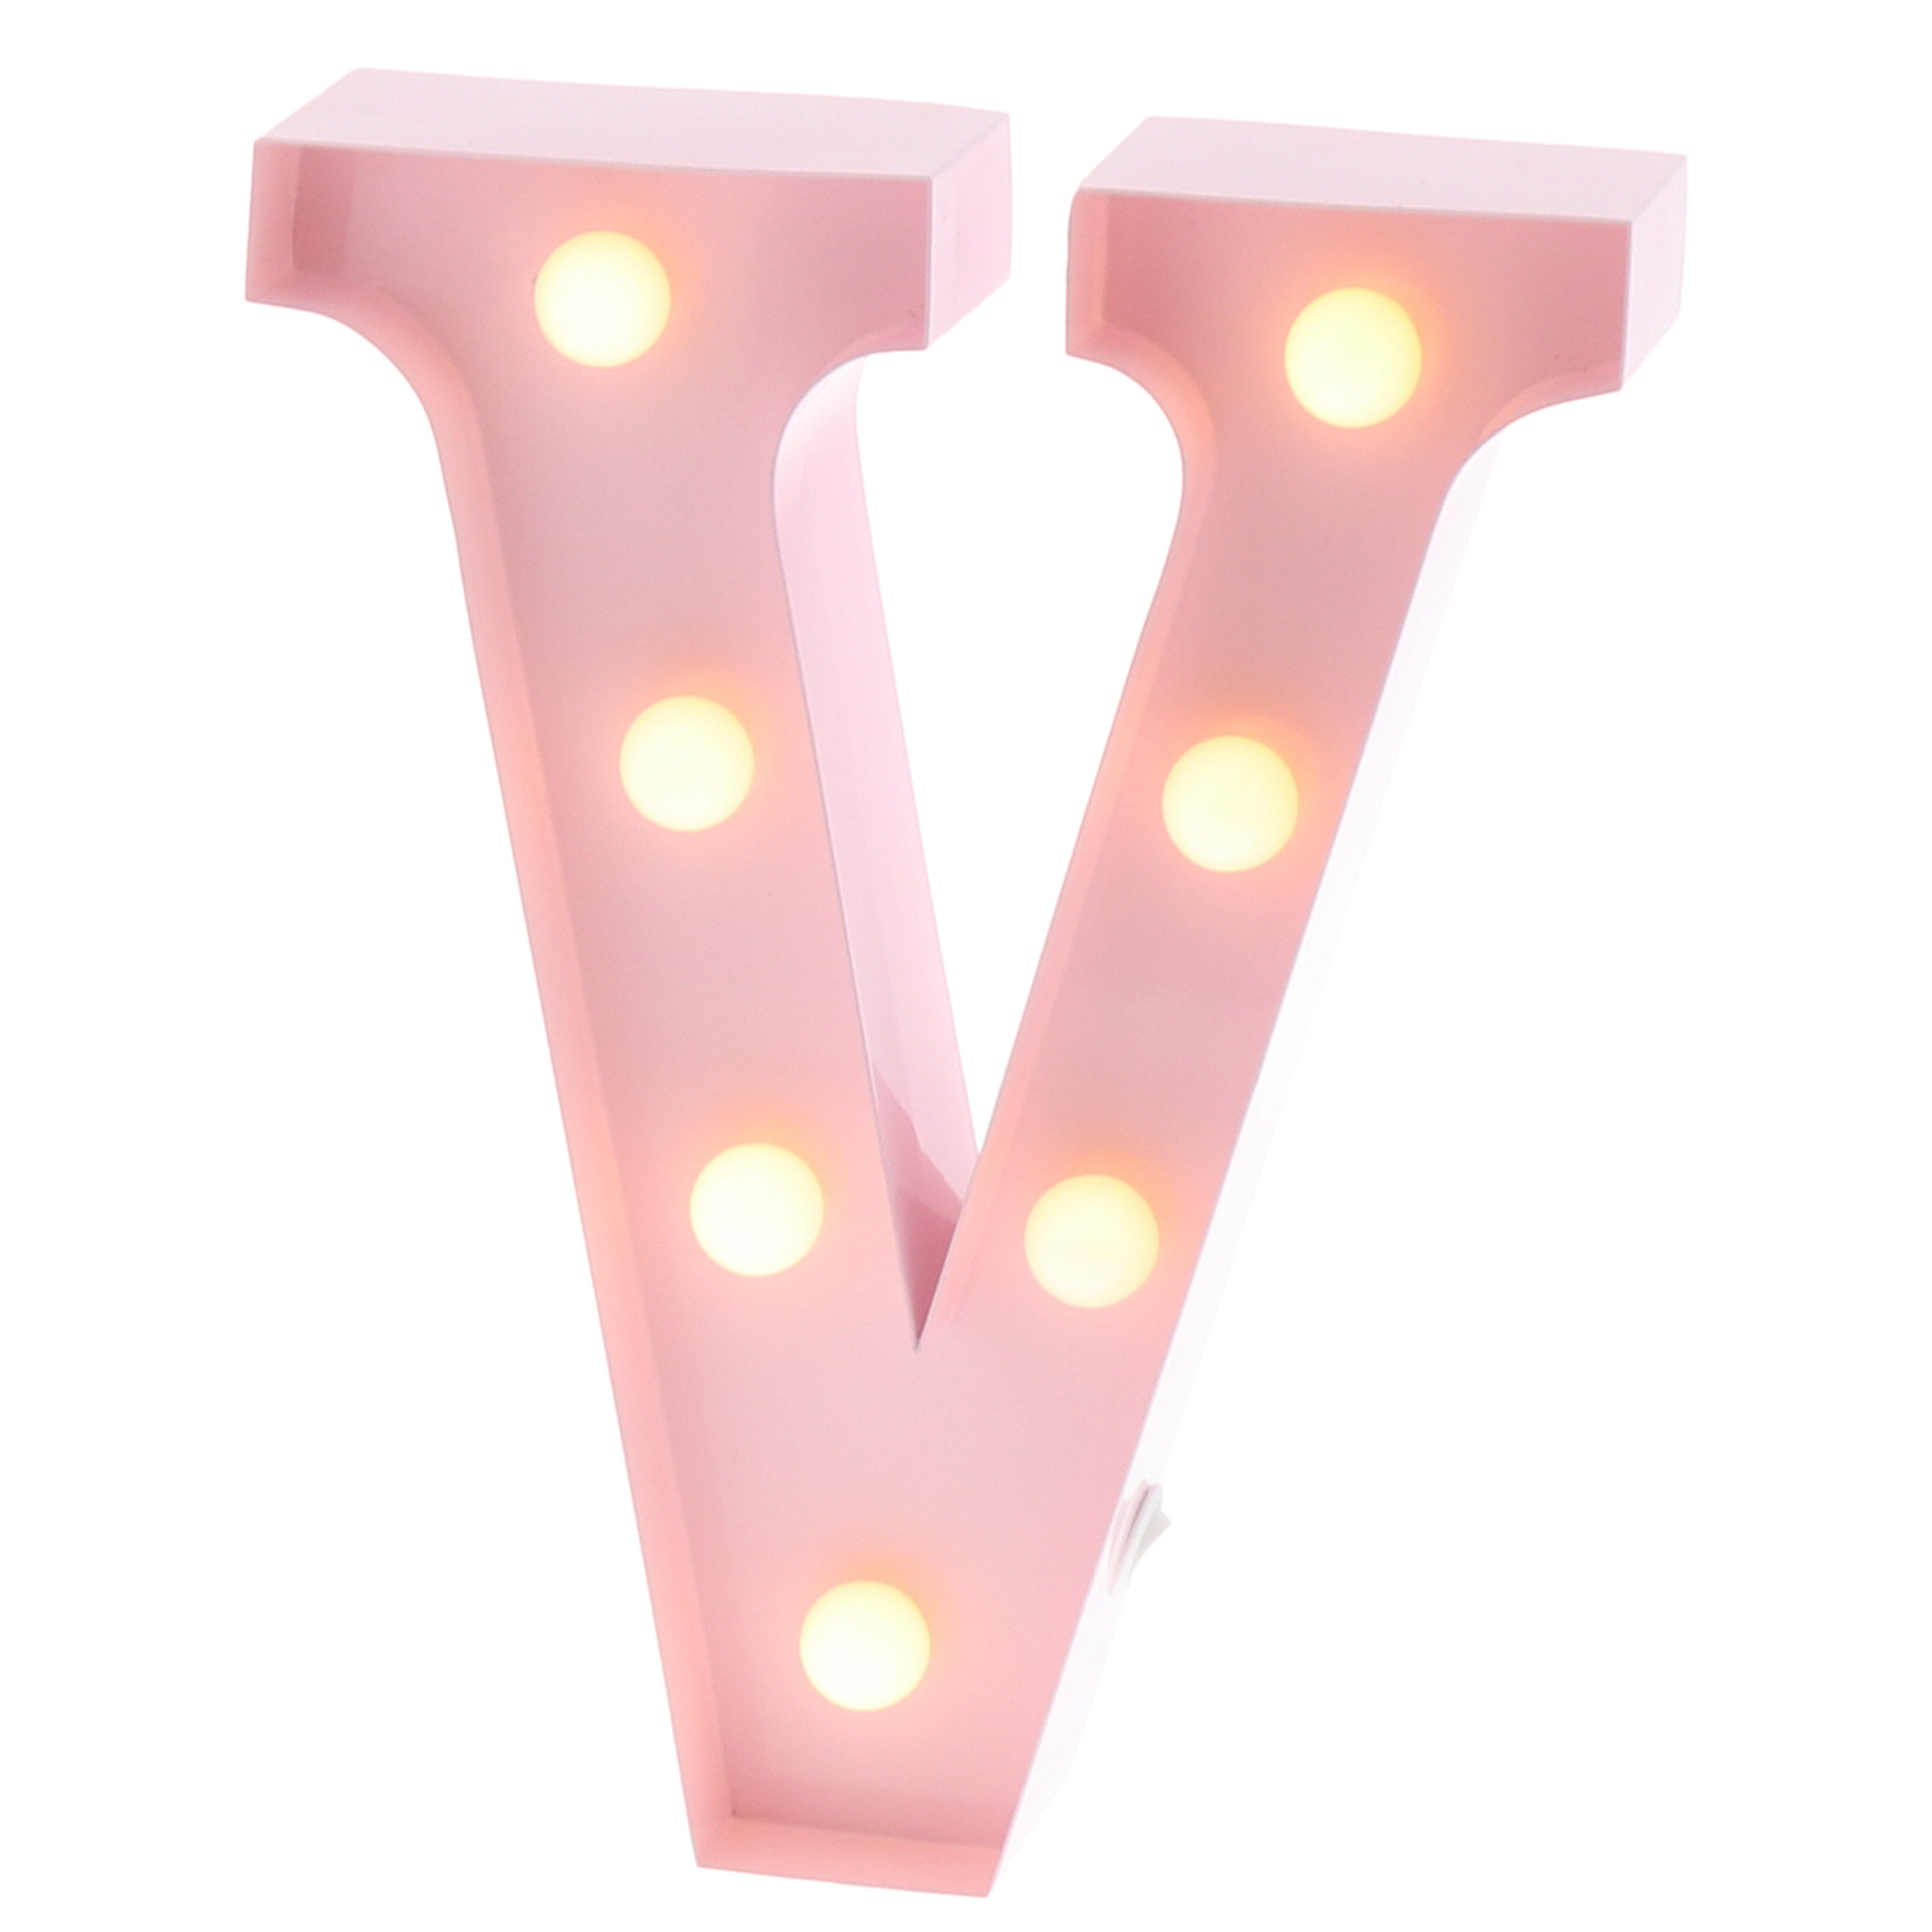 Home and Event Decoration 9” Barnyard Designs Metal Marquee Letter V Light Up Wall Initial Nursery Letter Baby Pink 